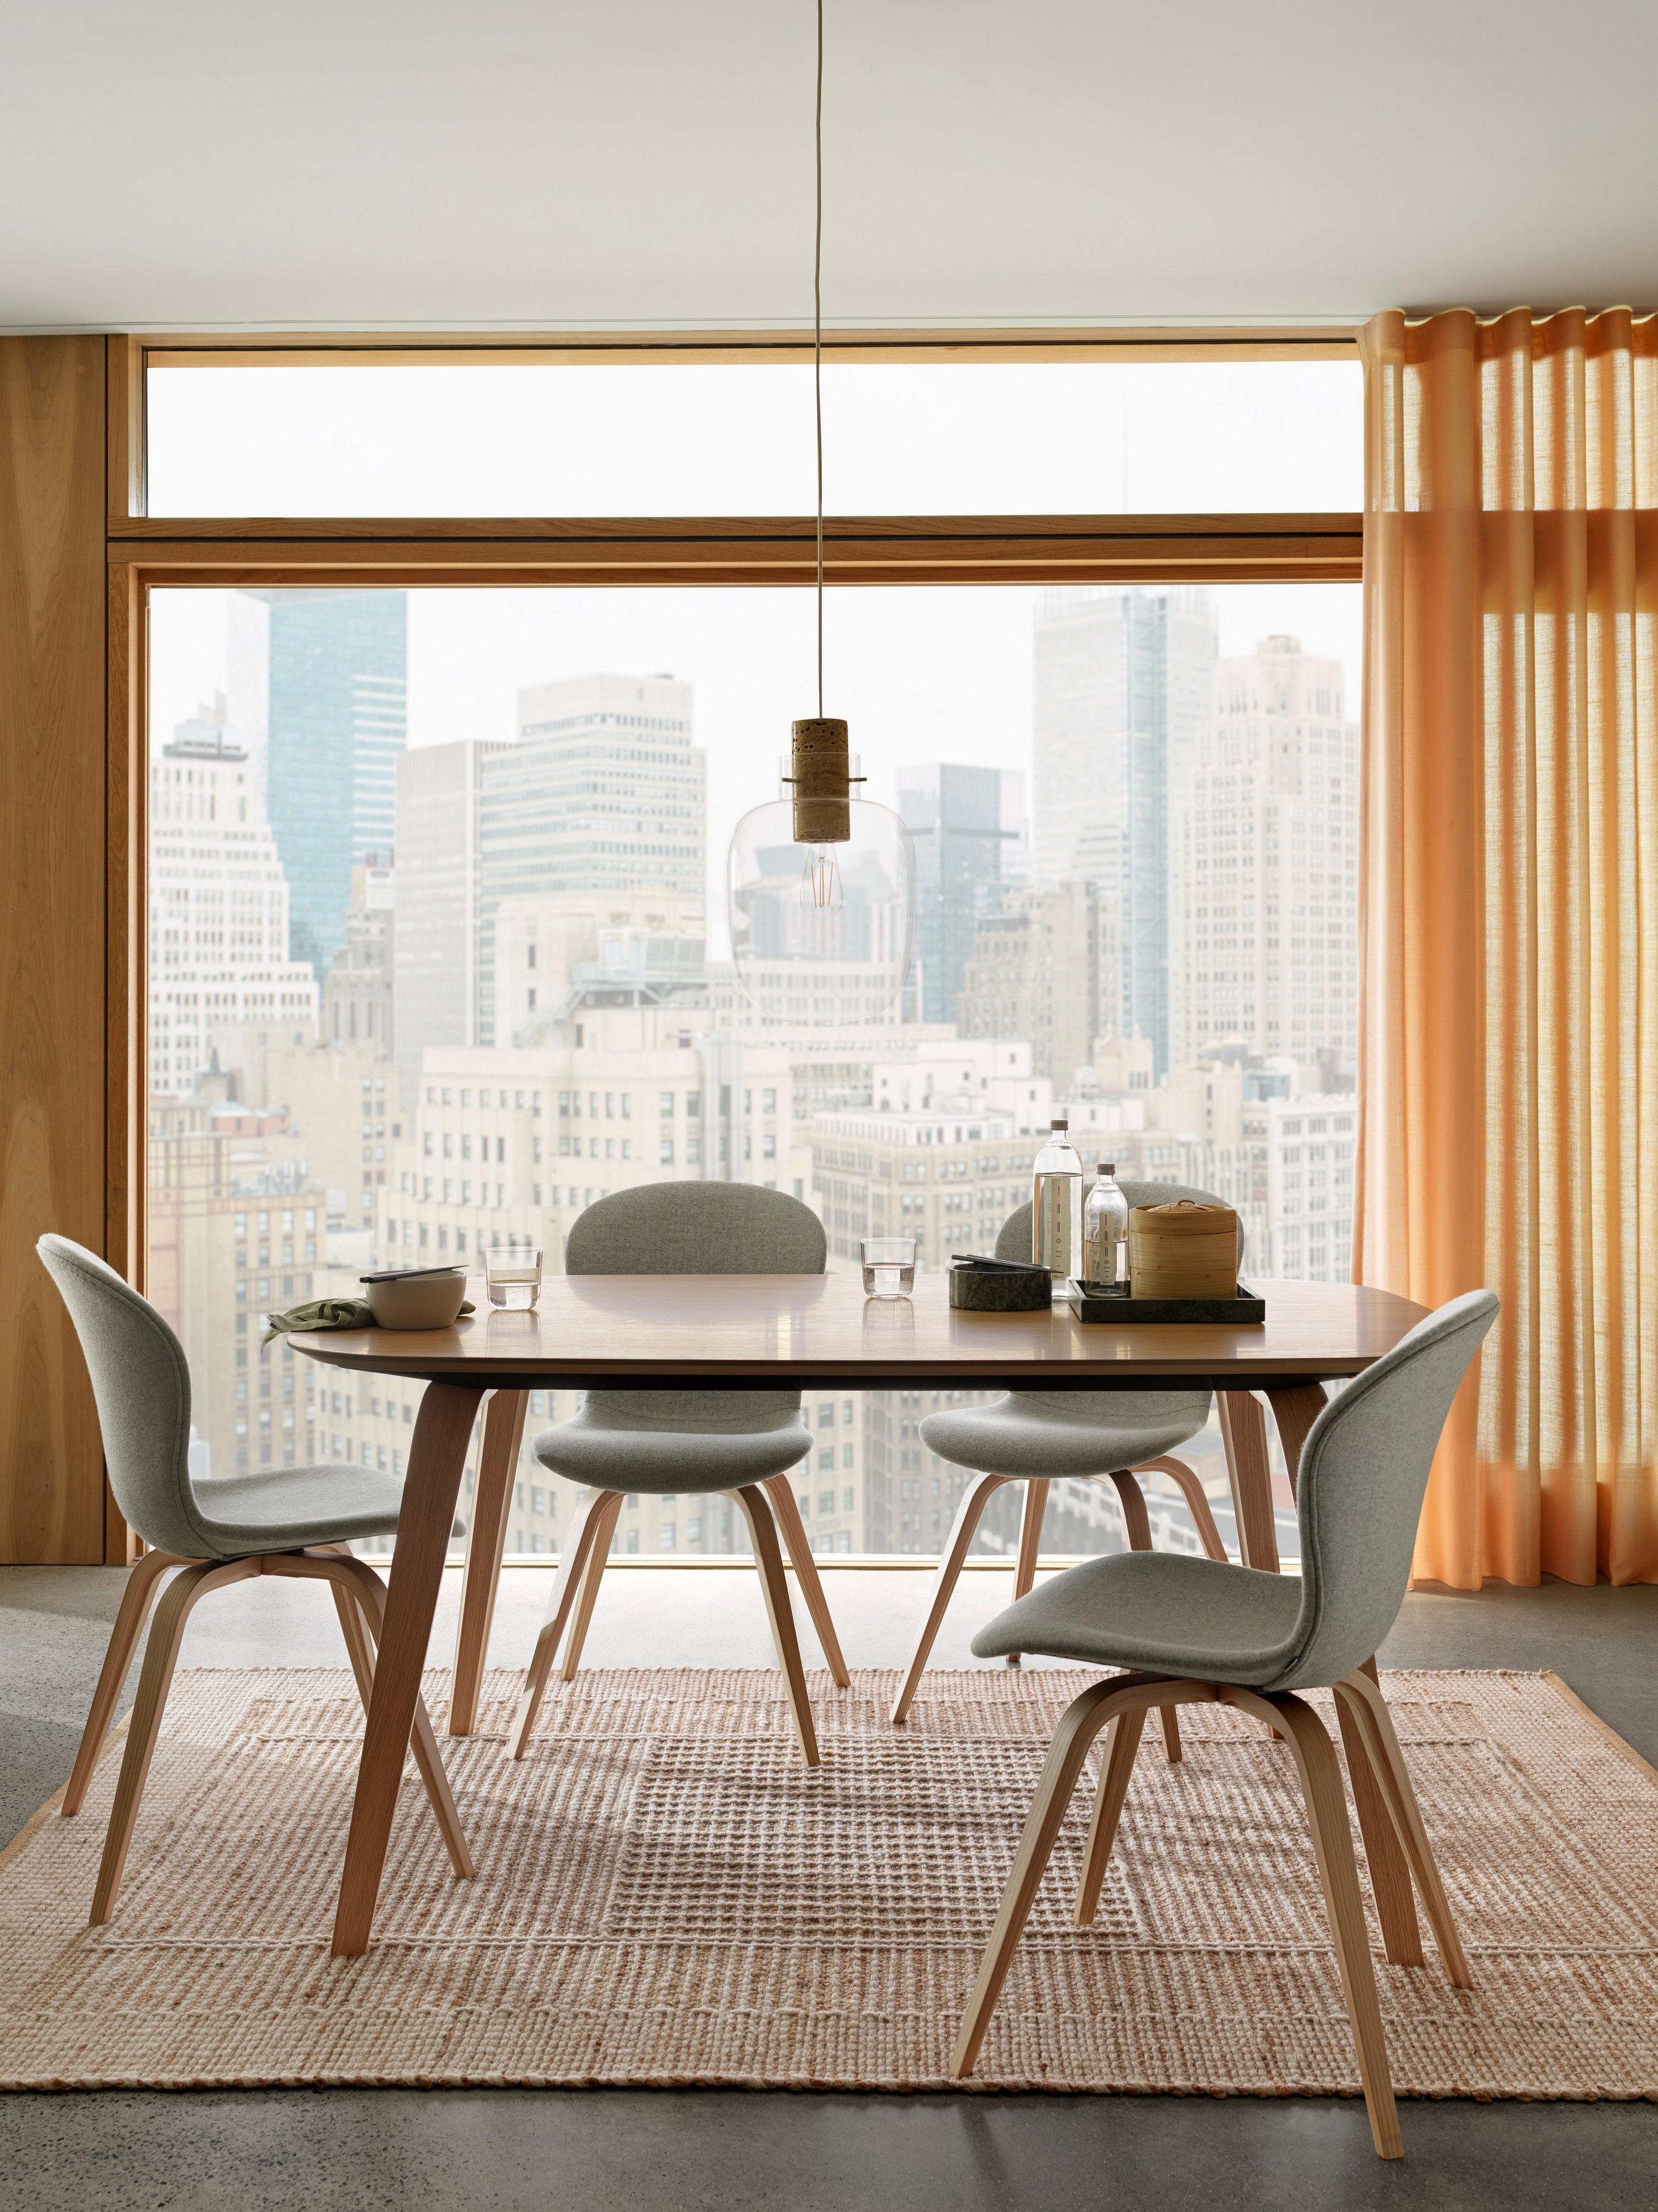 Dining area with table, chairs, and pendant light, city view through large window, on a woven rug.